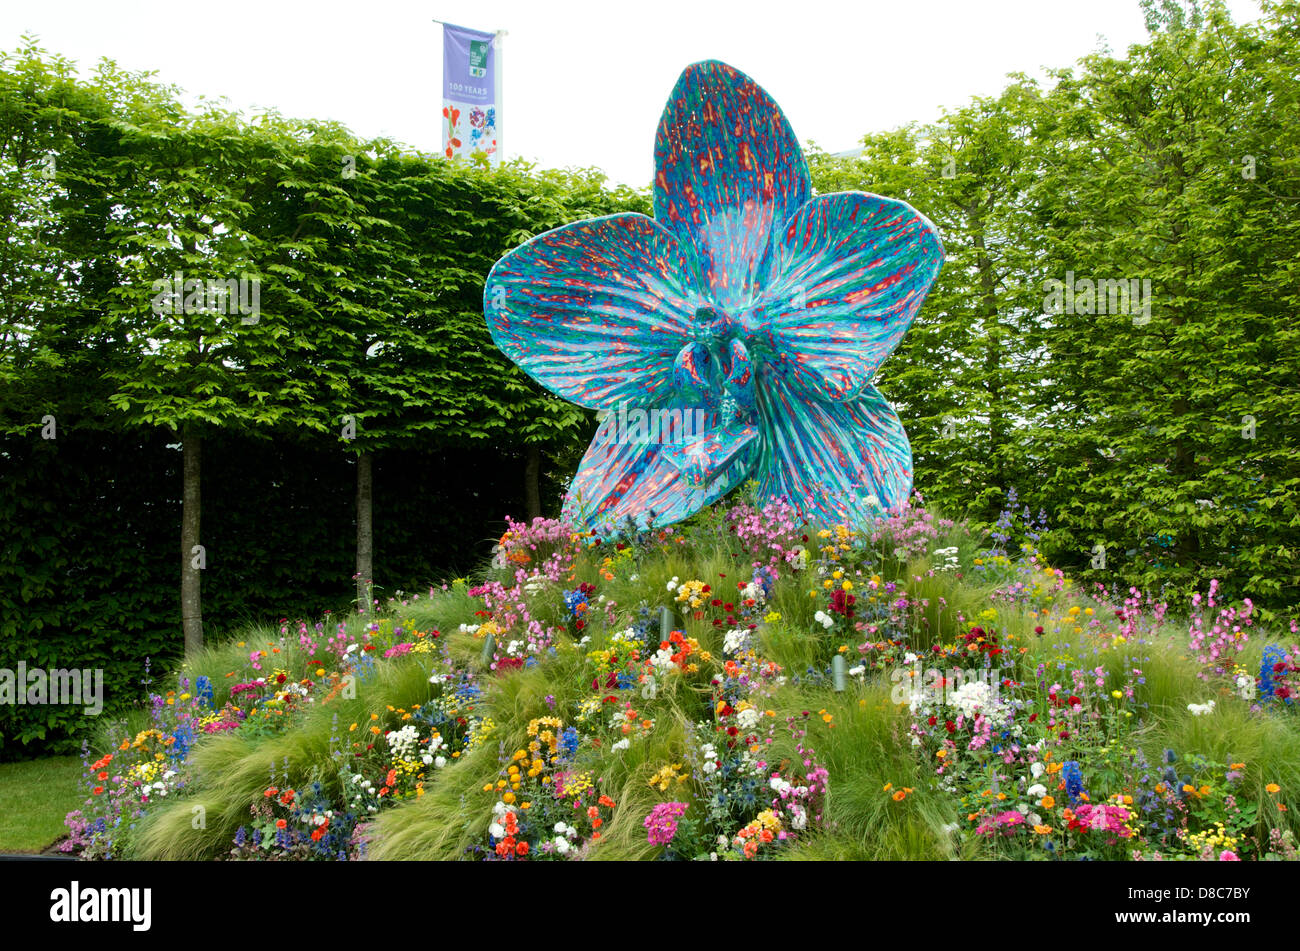 Flower Sculpture By Marc Quinn to celebrate the Centenary of RHS Chelsea Flower Show 1913 -2013 in London, UK Stock Photo